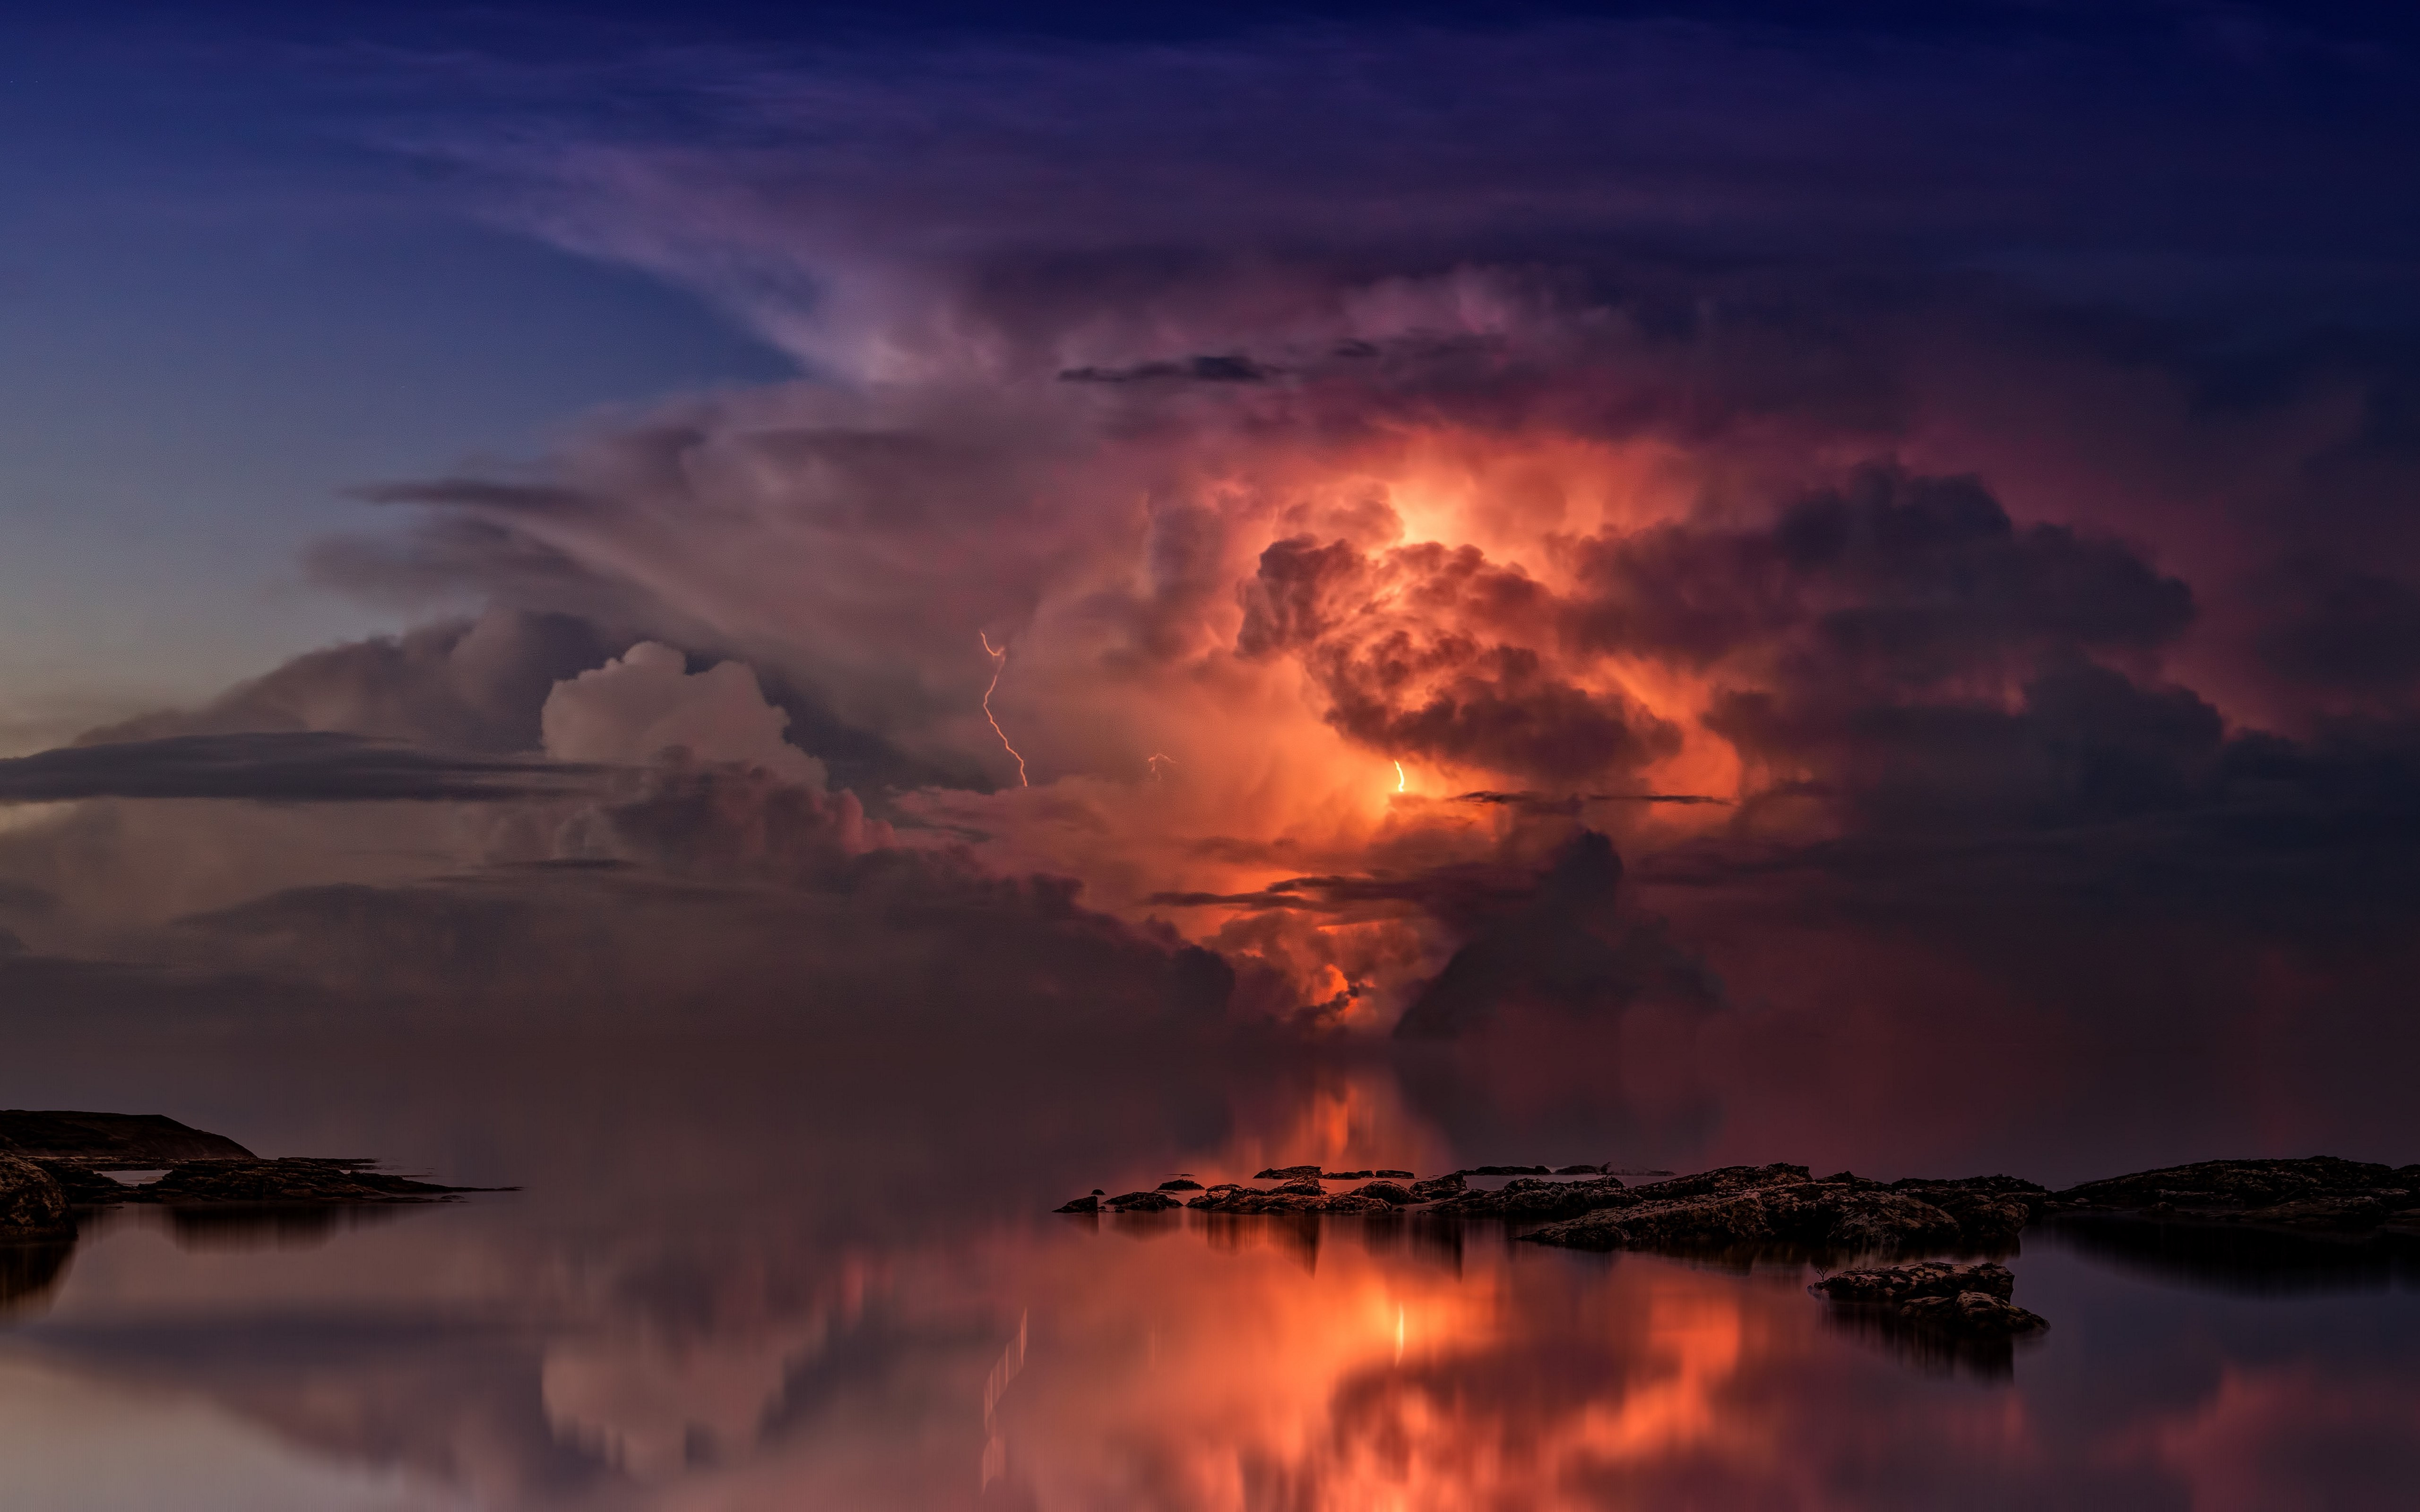 Download wallpaper: Lightning and thunderstorm in the sky 5120x3200